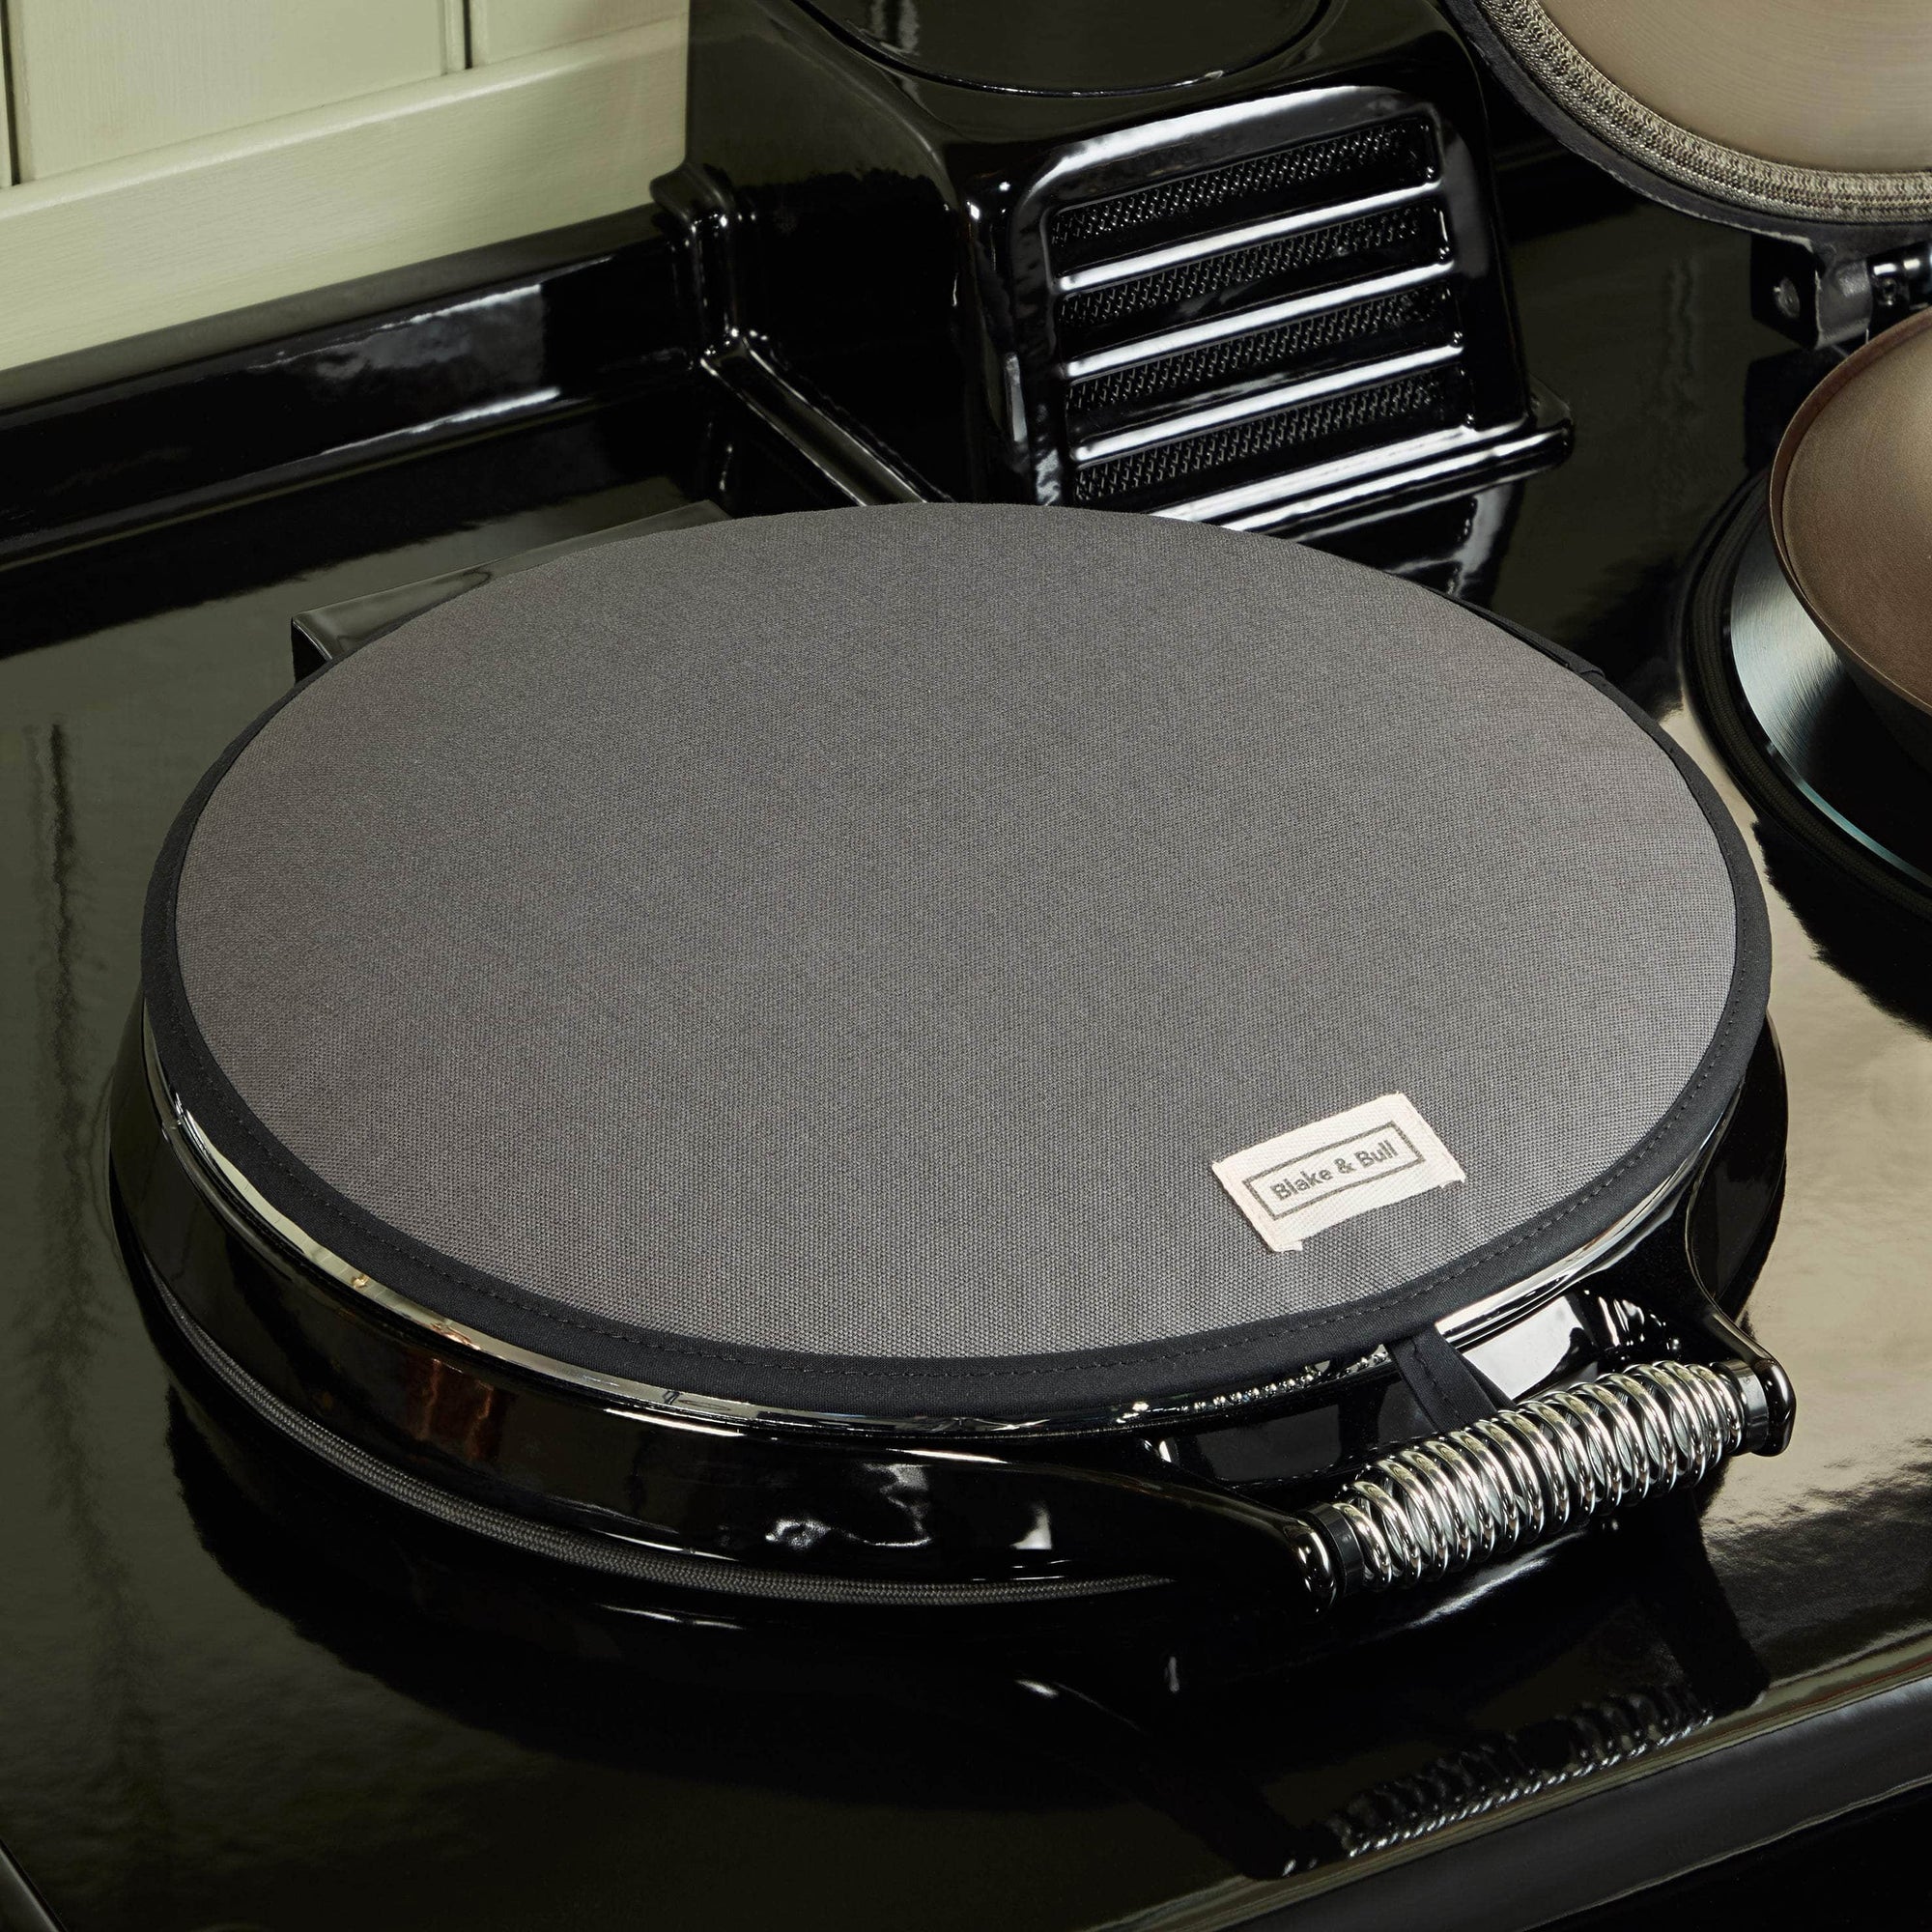 Chefs pad for Aga cookers with loop - 'Grey'